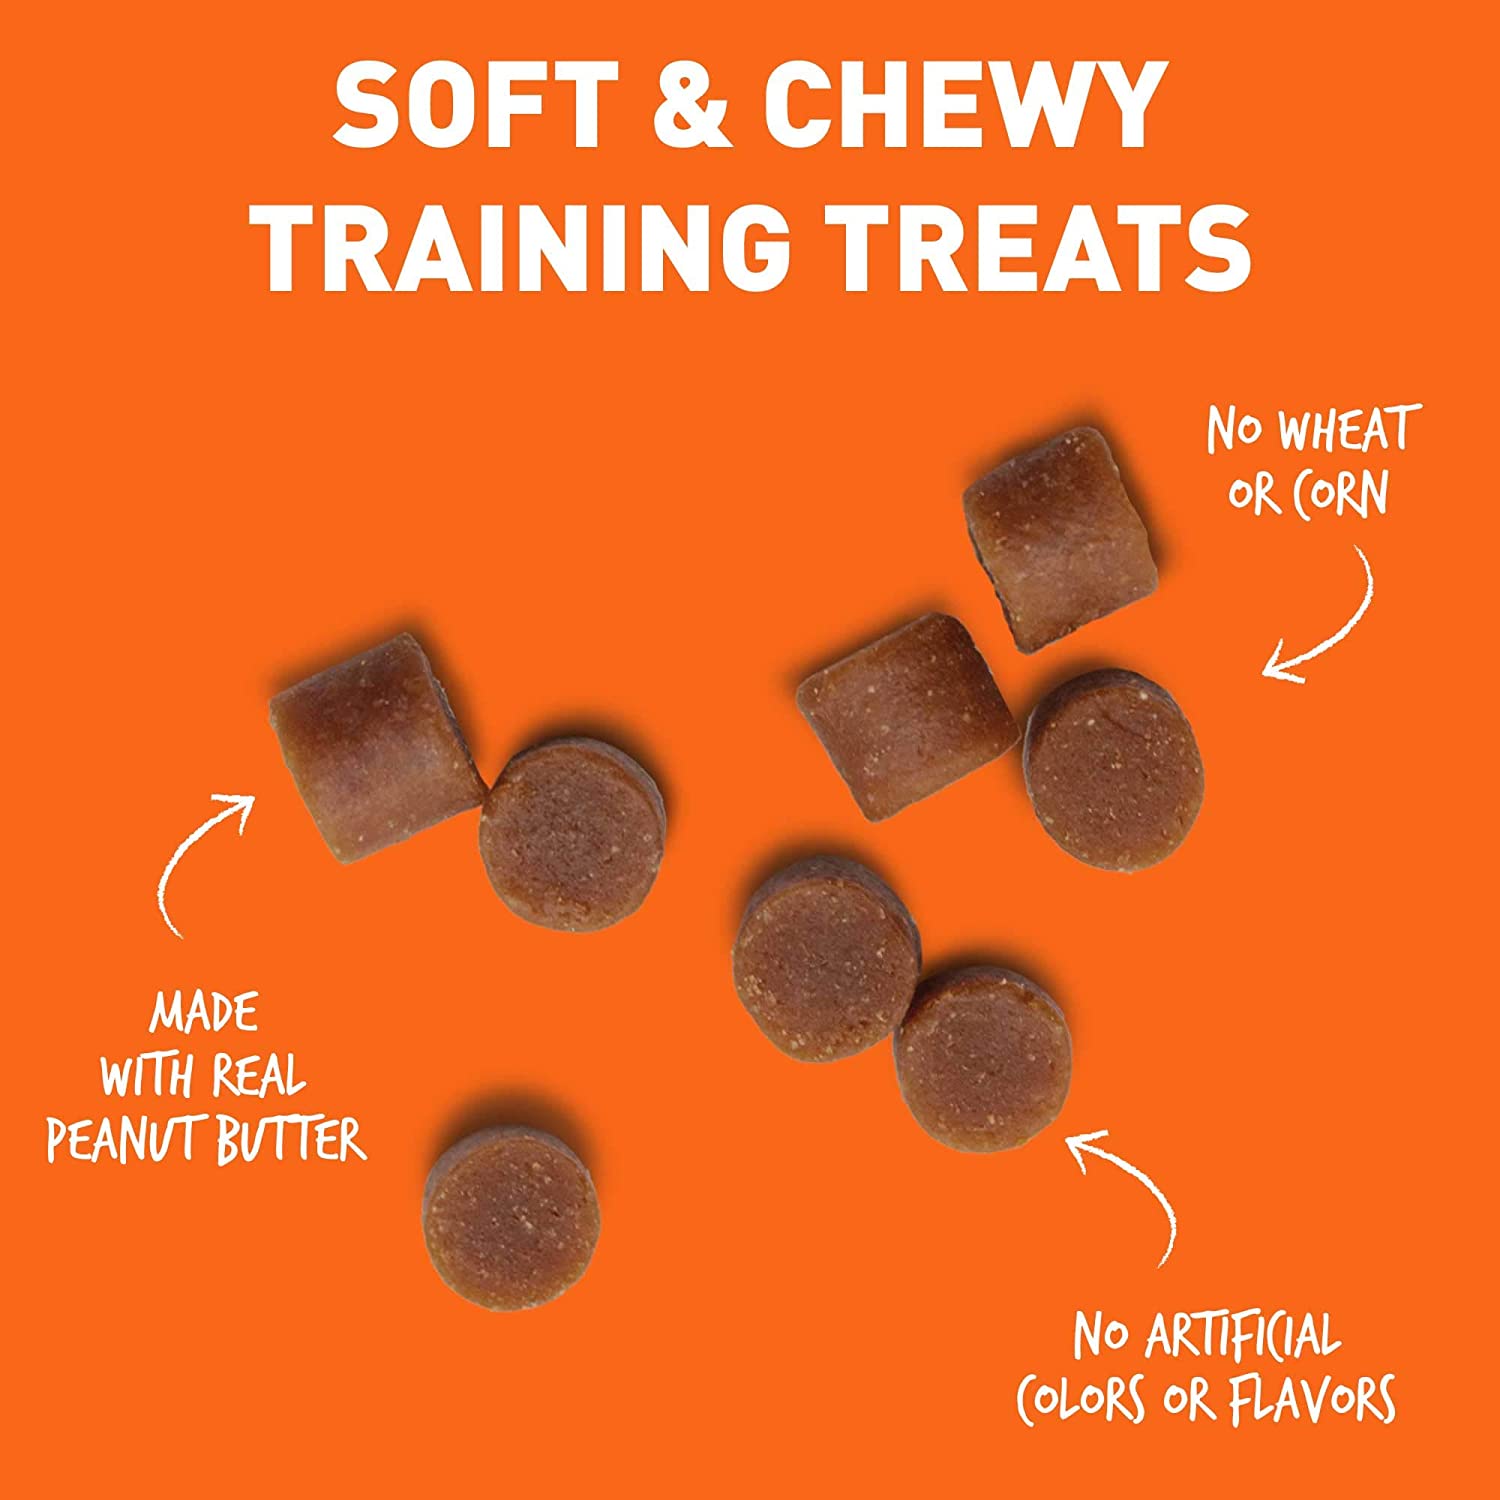 Cloud Star Tricky Trainers Chewy Treats Grain Free Peanut Butter - 5 oz